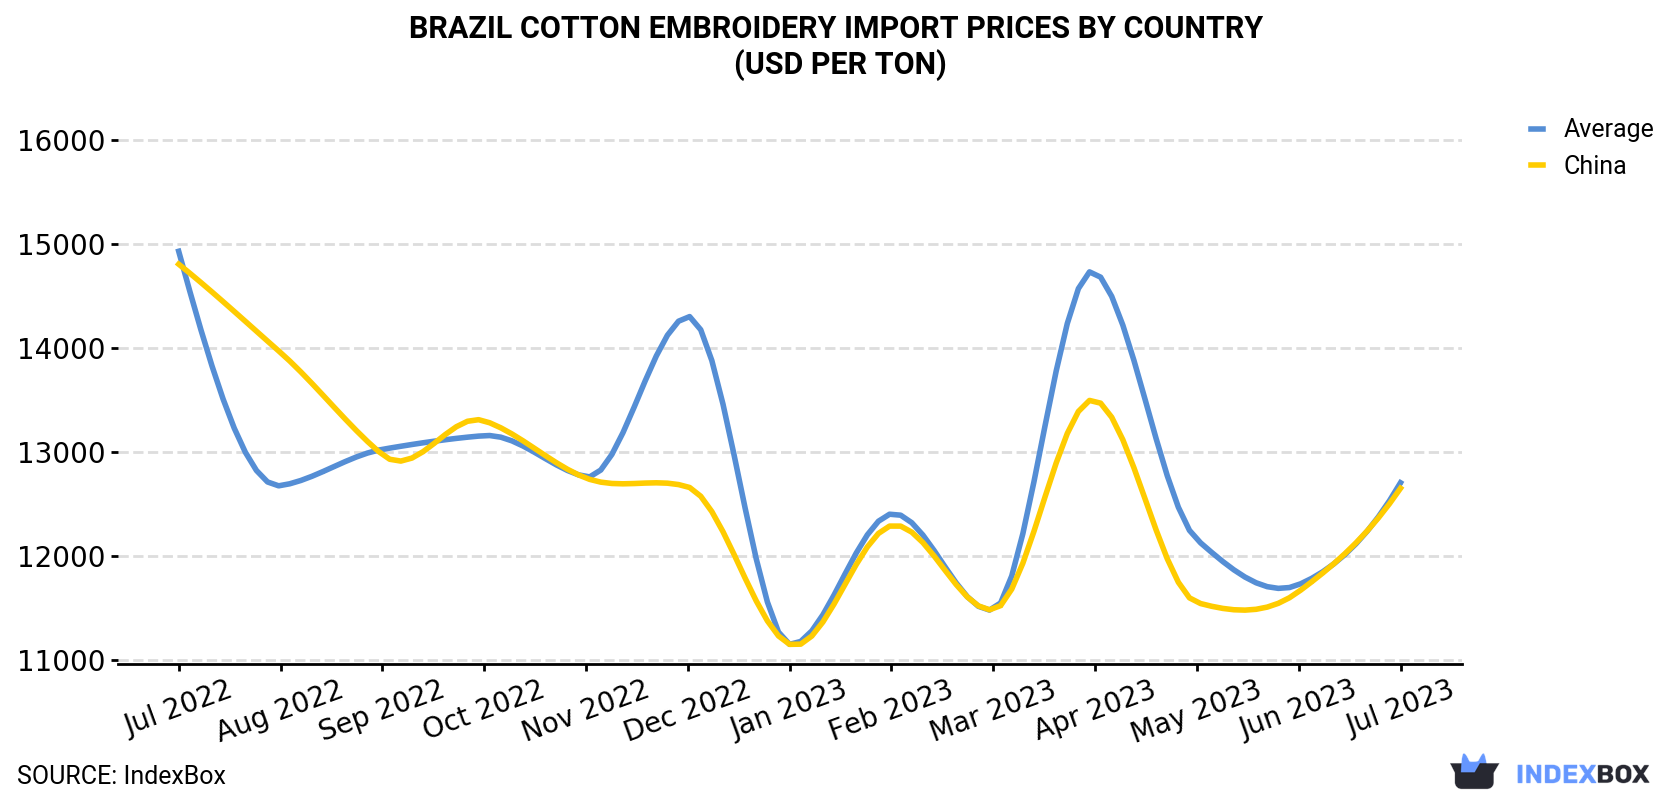 Brazil Cotton Embroidery Import Prices By Country (USD Per Ton)